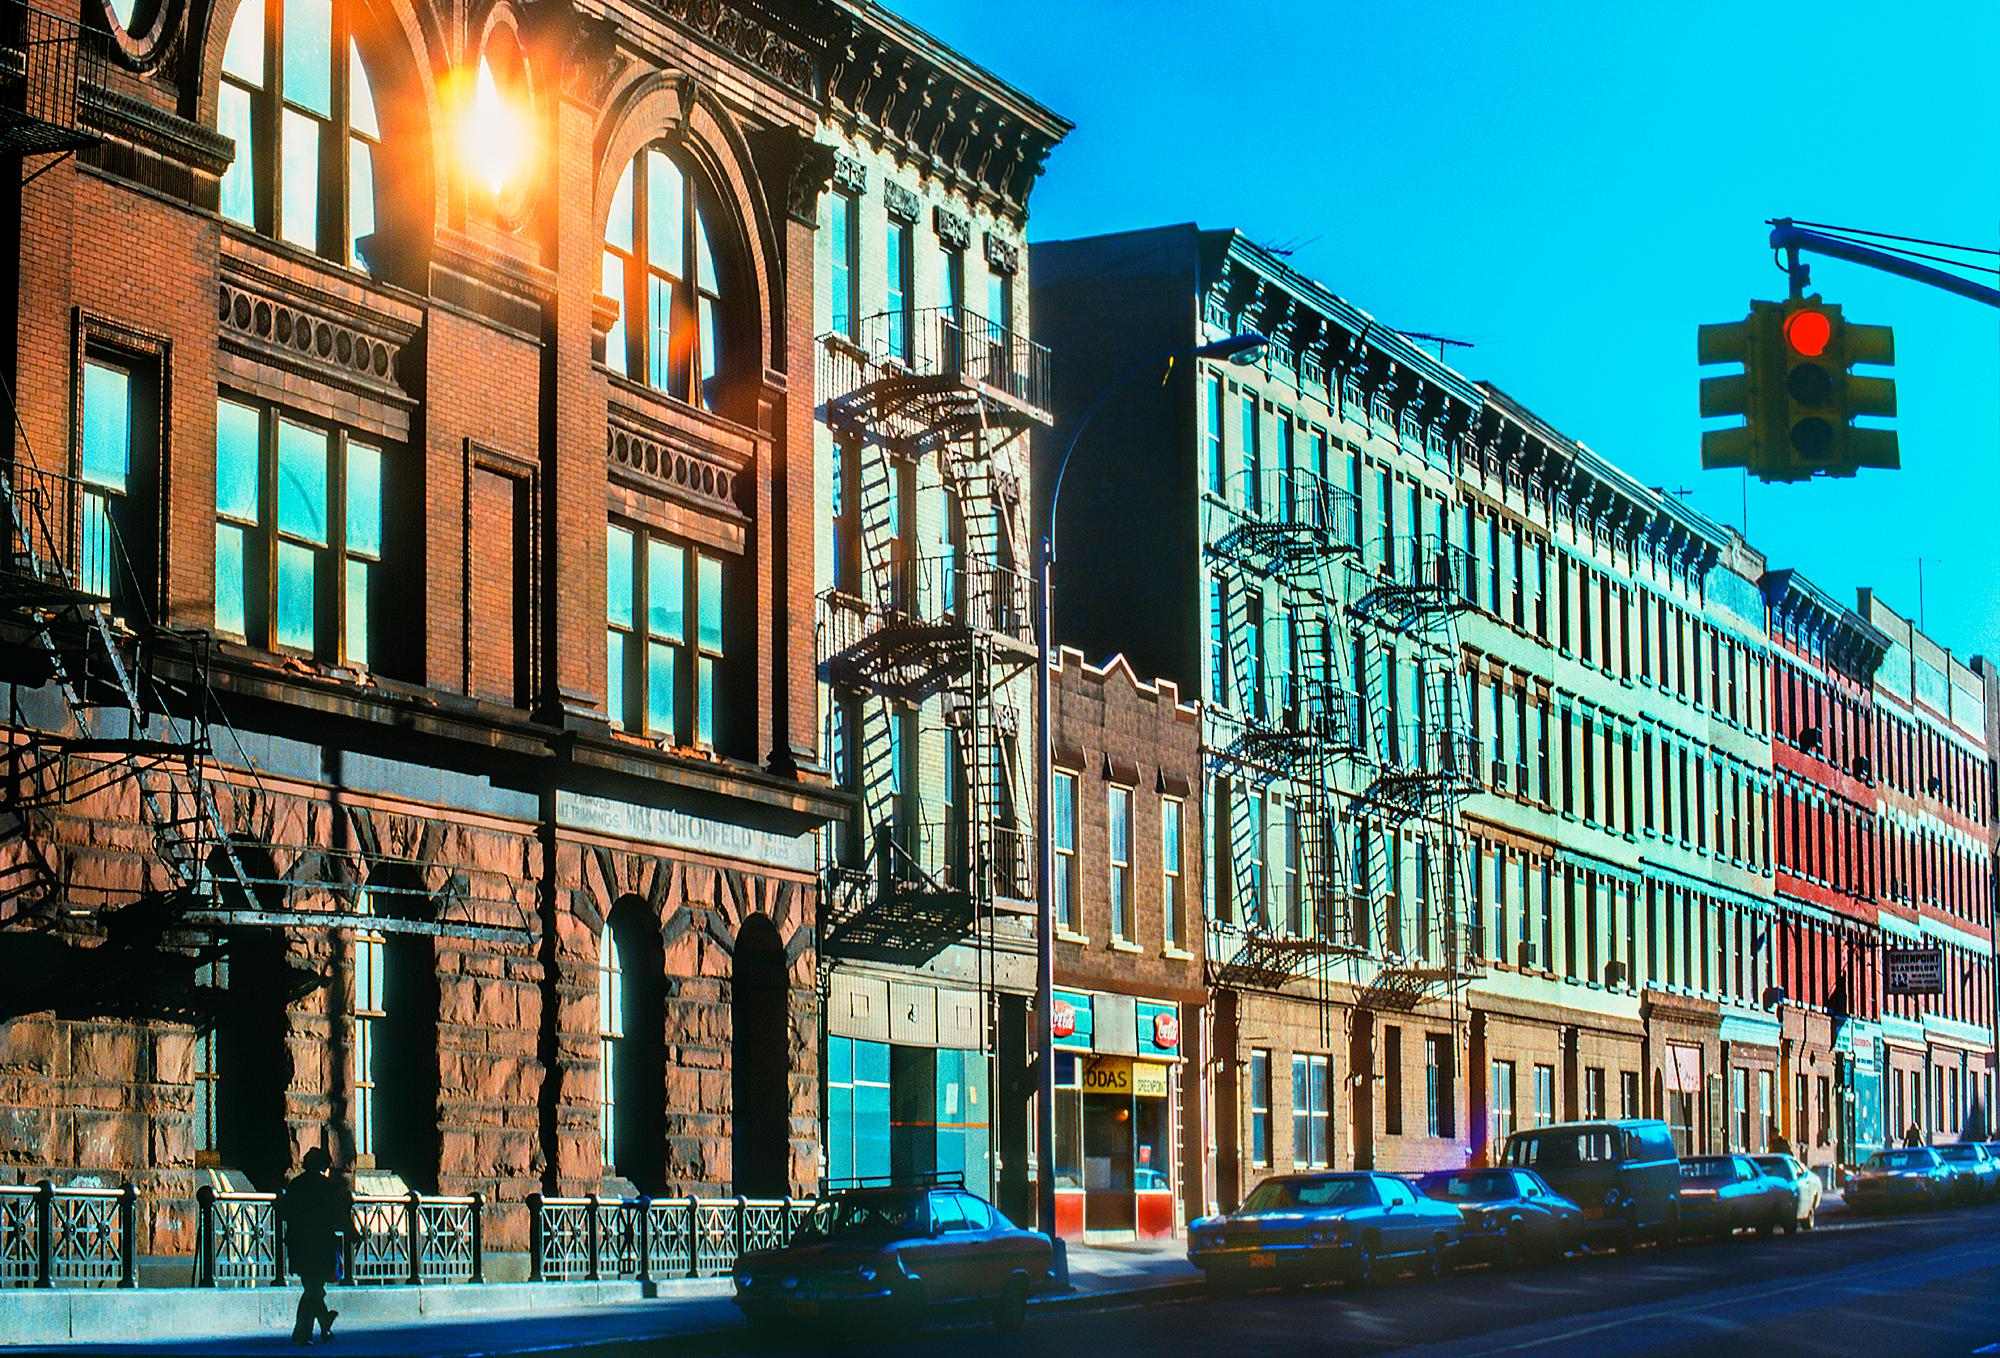 Mitchell Funk Color Photograph - Brooklyn Row Houses with Candy Store and 19th-century buildings